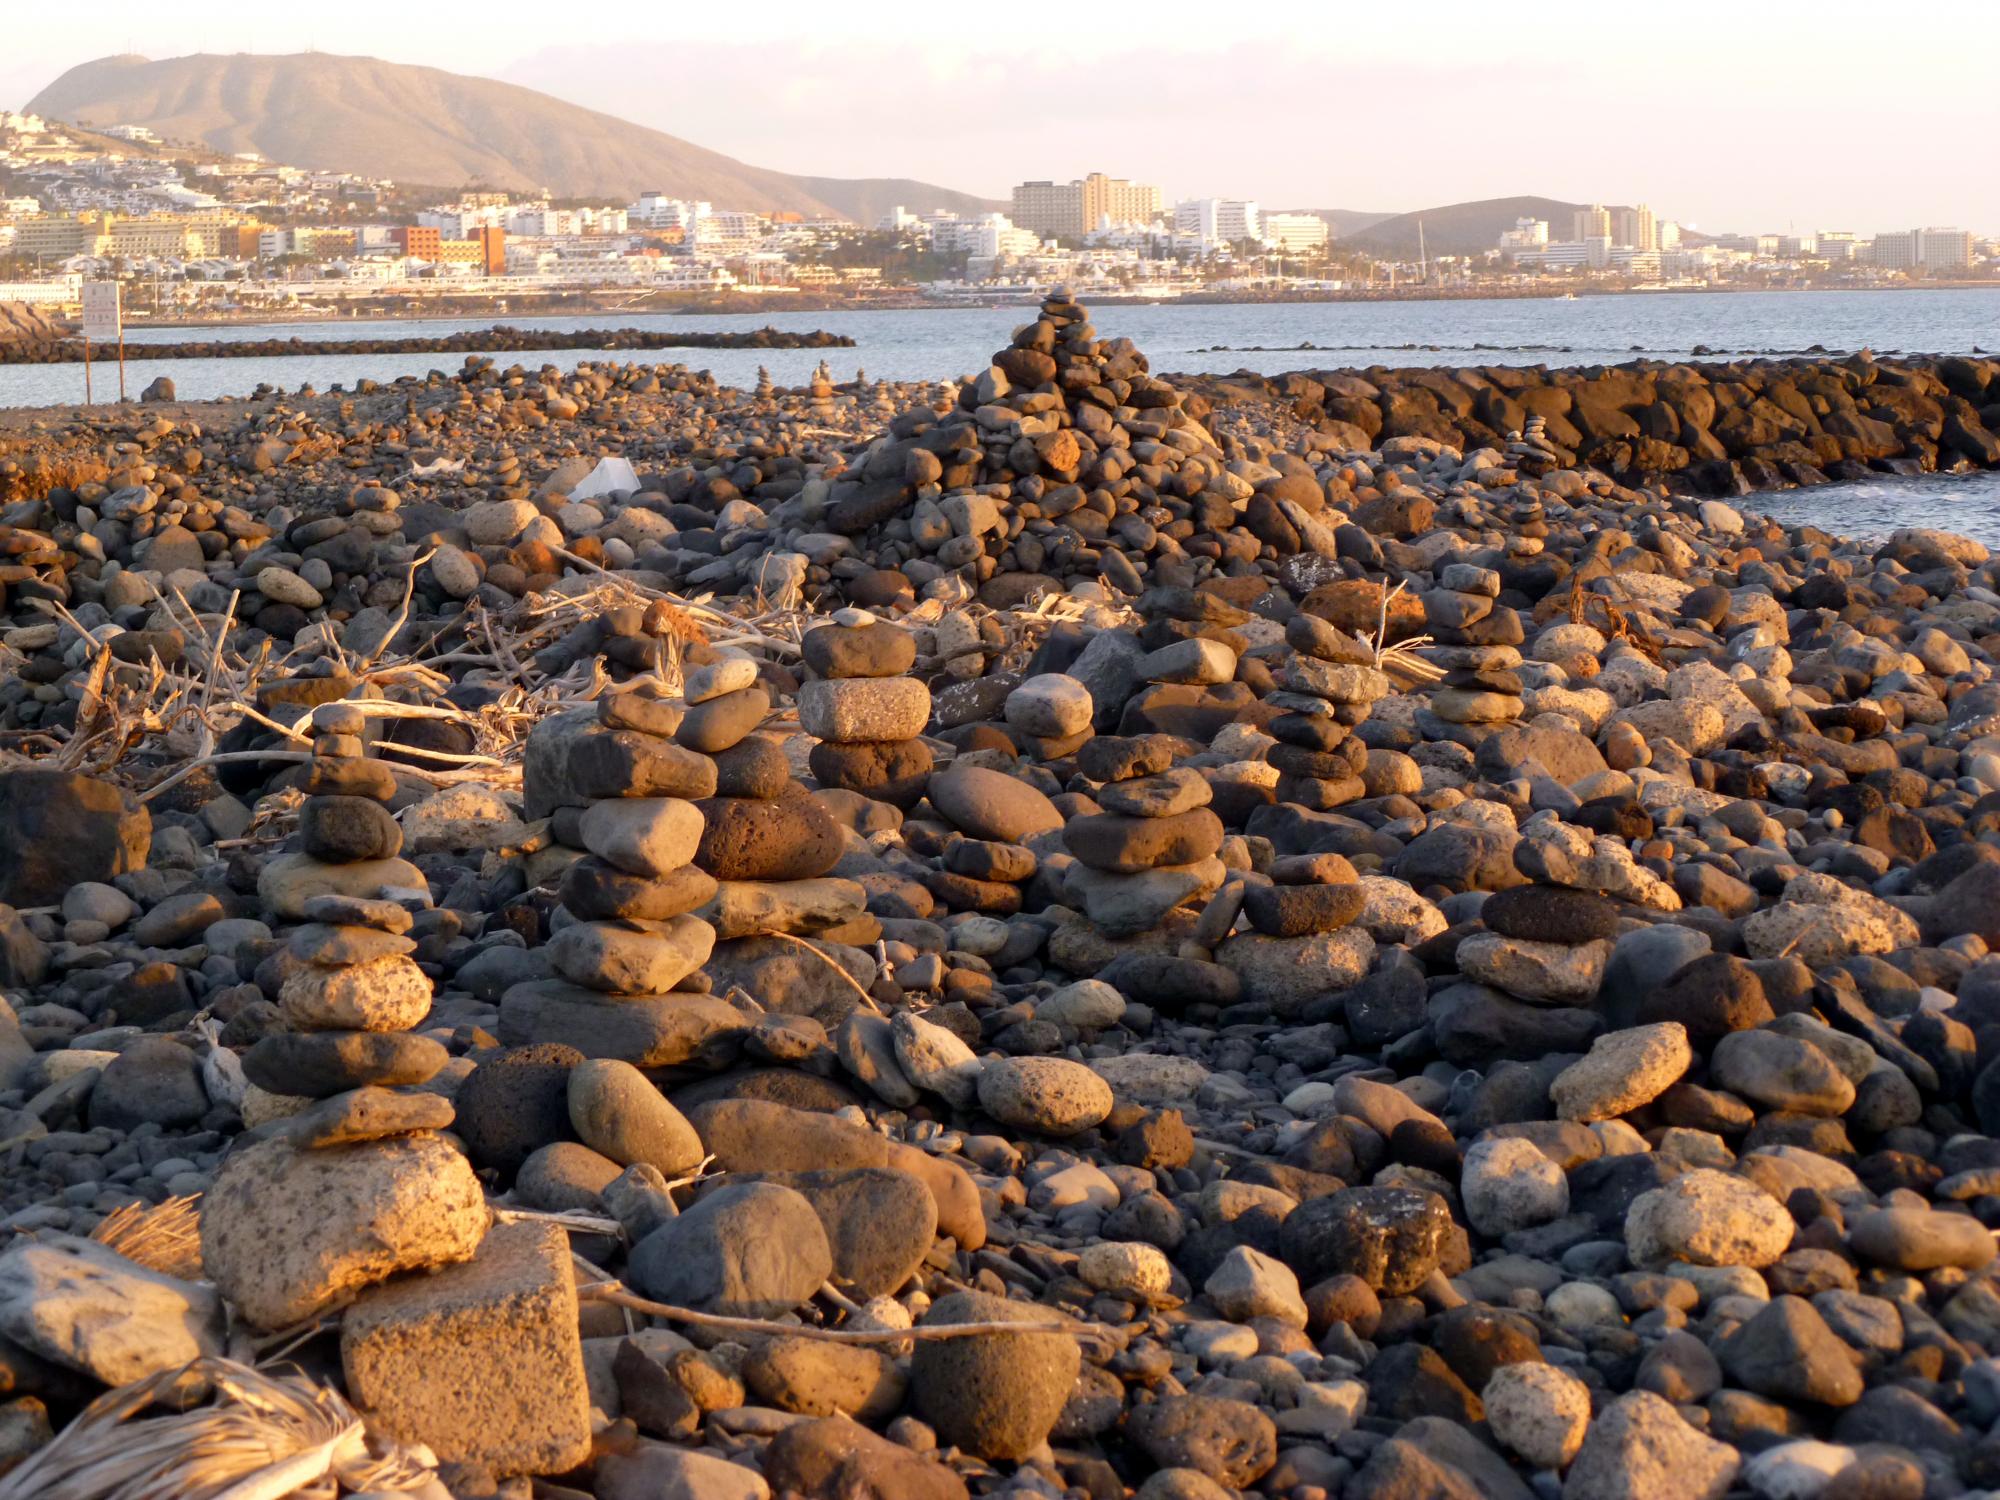  Canary Islands - Rock Towers